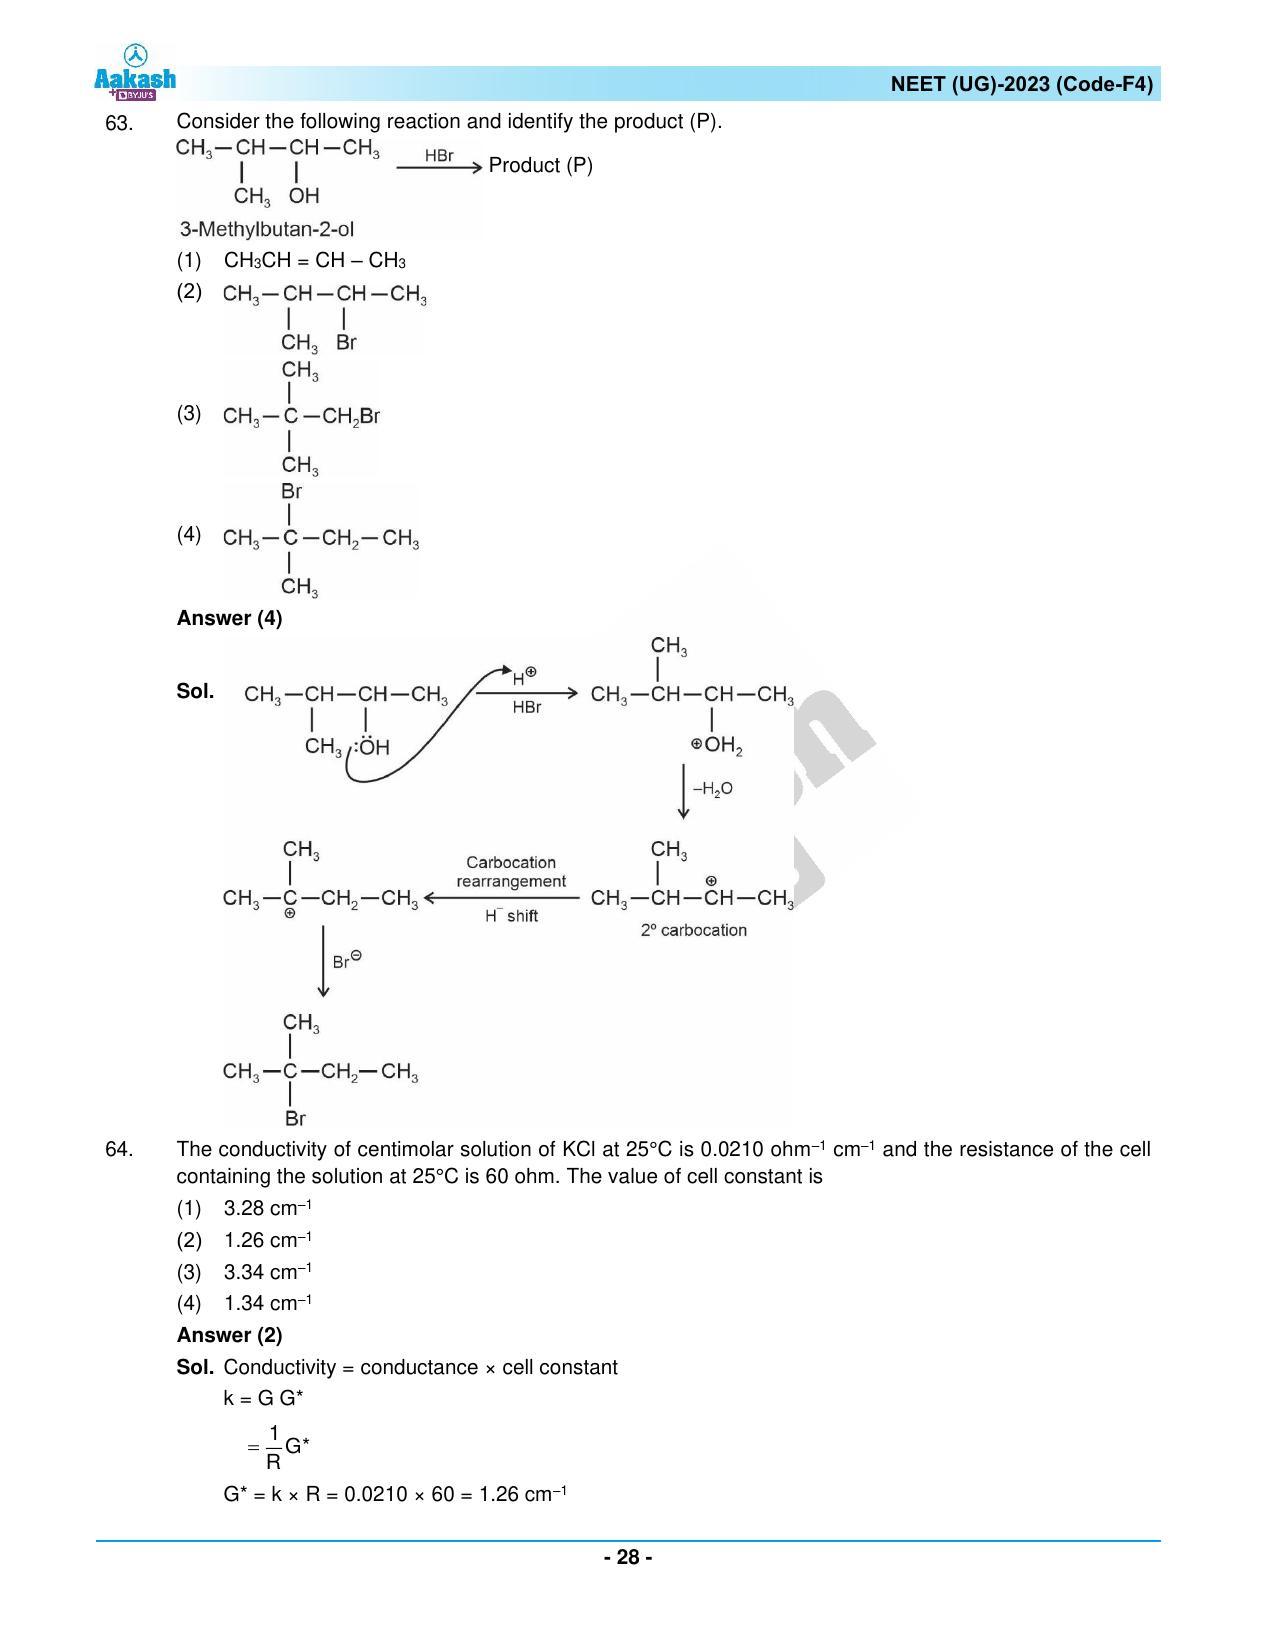 NEET 2023 Question Paper F4 - Page 28